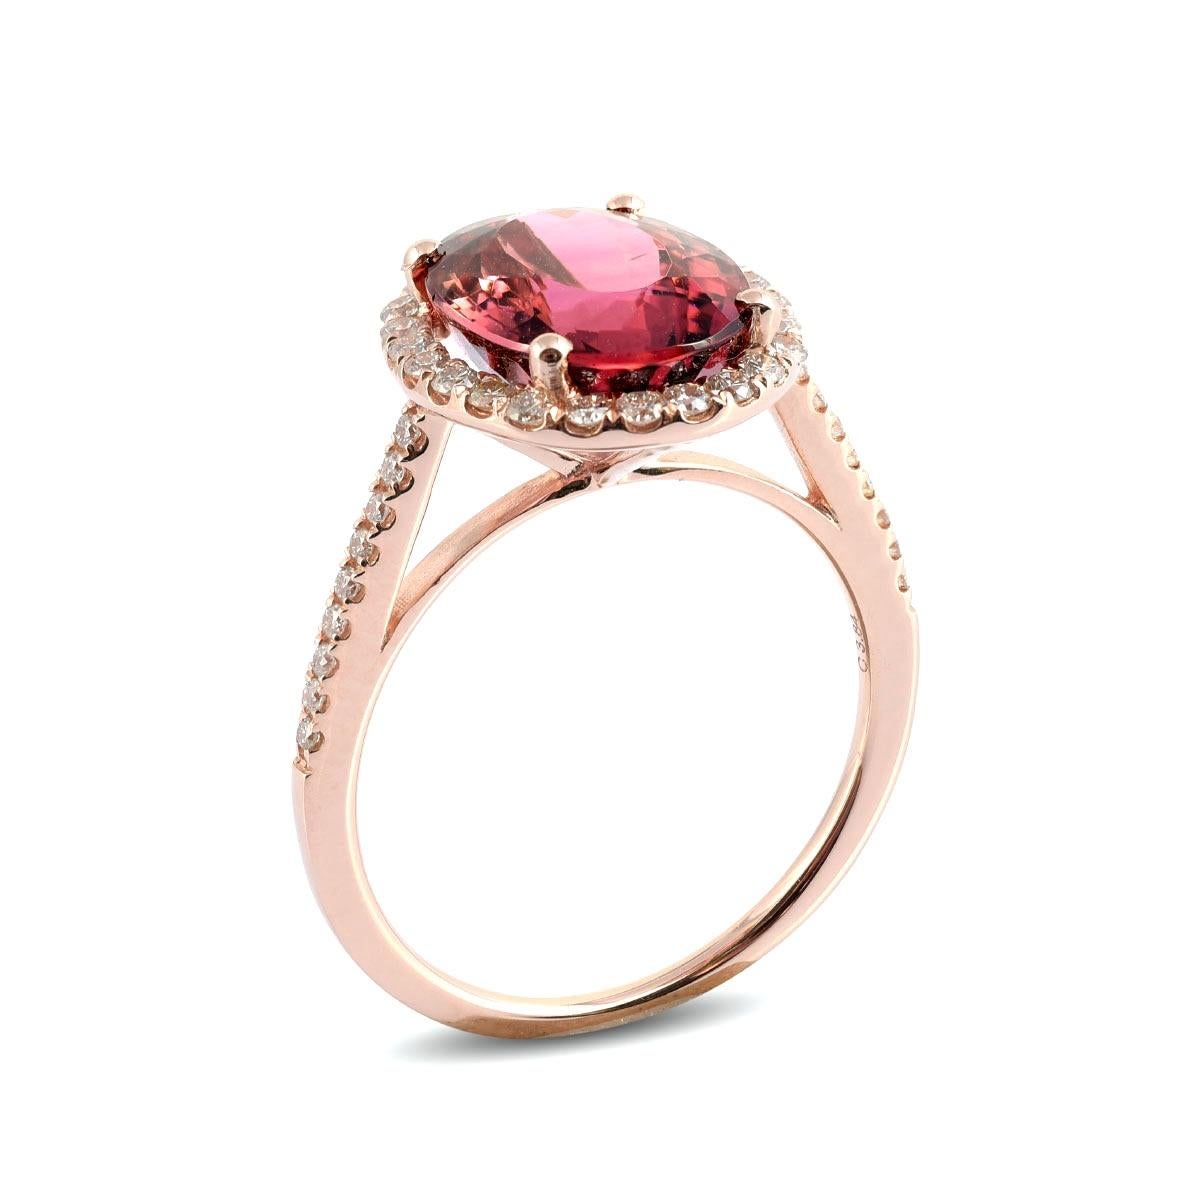 Ring Overview
SKU
2649
Center Stone
Pink Tourmaline
Side Stones
Diamonds
Metal Type
14K Rose Gold
Metal Weight
2.37 gr
Report
N/A
Size
6.75


Center Stone
Quantity
1
Total Weight
3.84 carats
Color
Pink
Color intensity
Strong
Shape
Oval
Clarity
Very